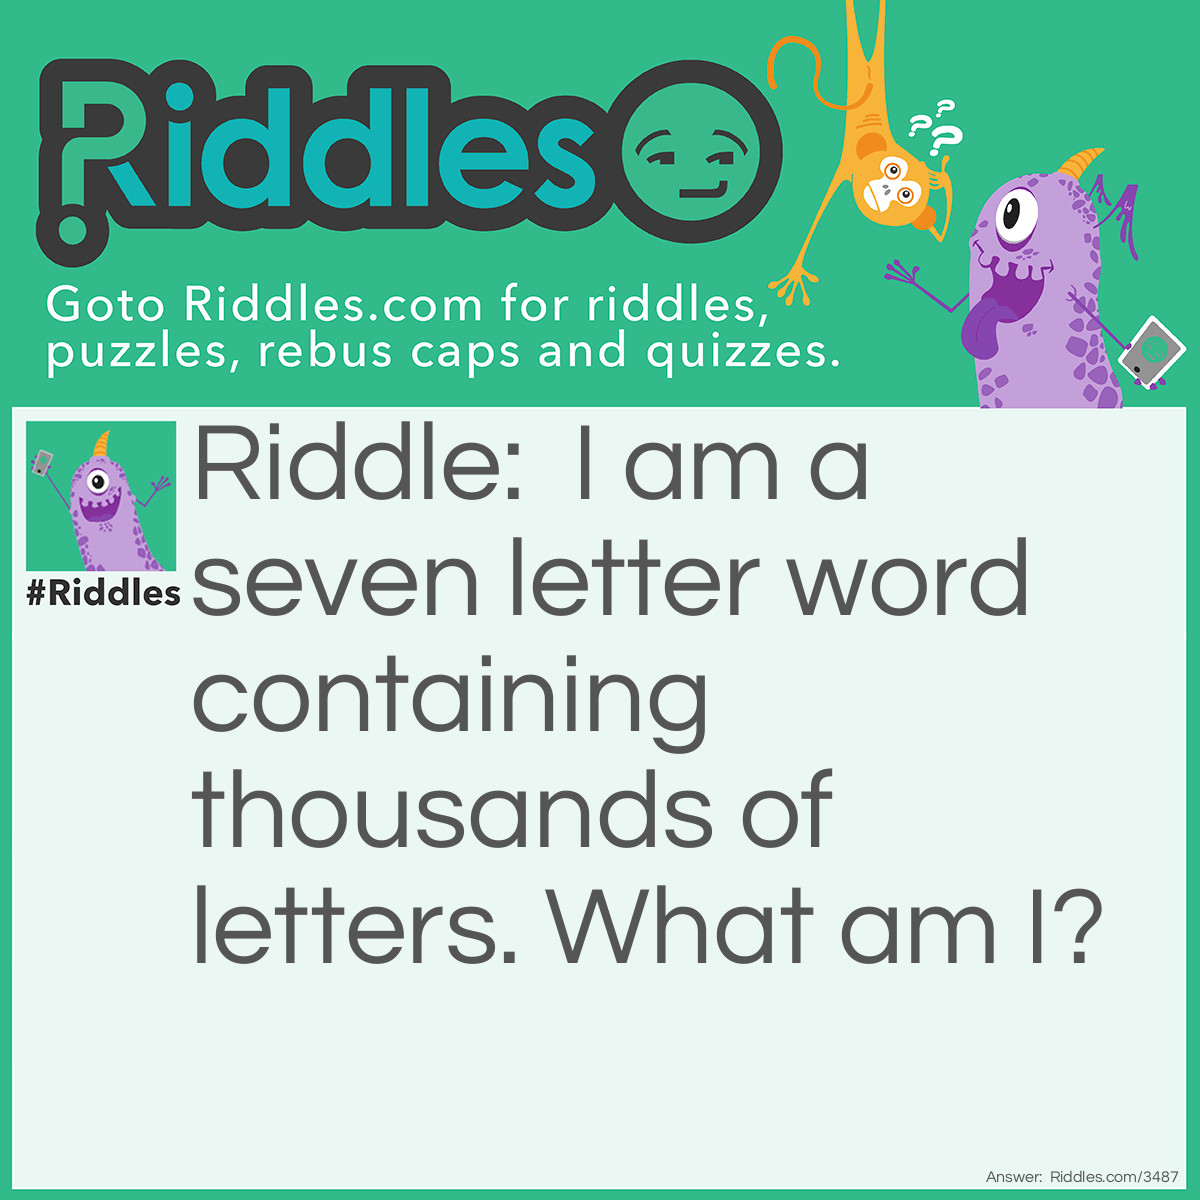 Riddle: I am a seven letter word containing thousands of letters. What am I? Answer: Mailbox.